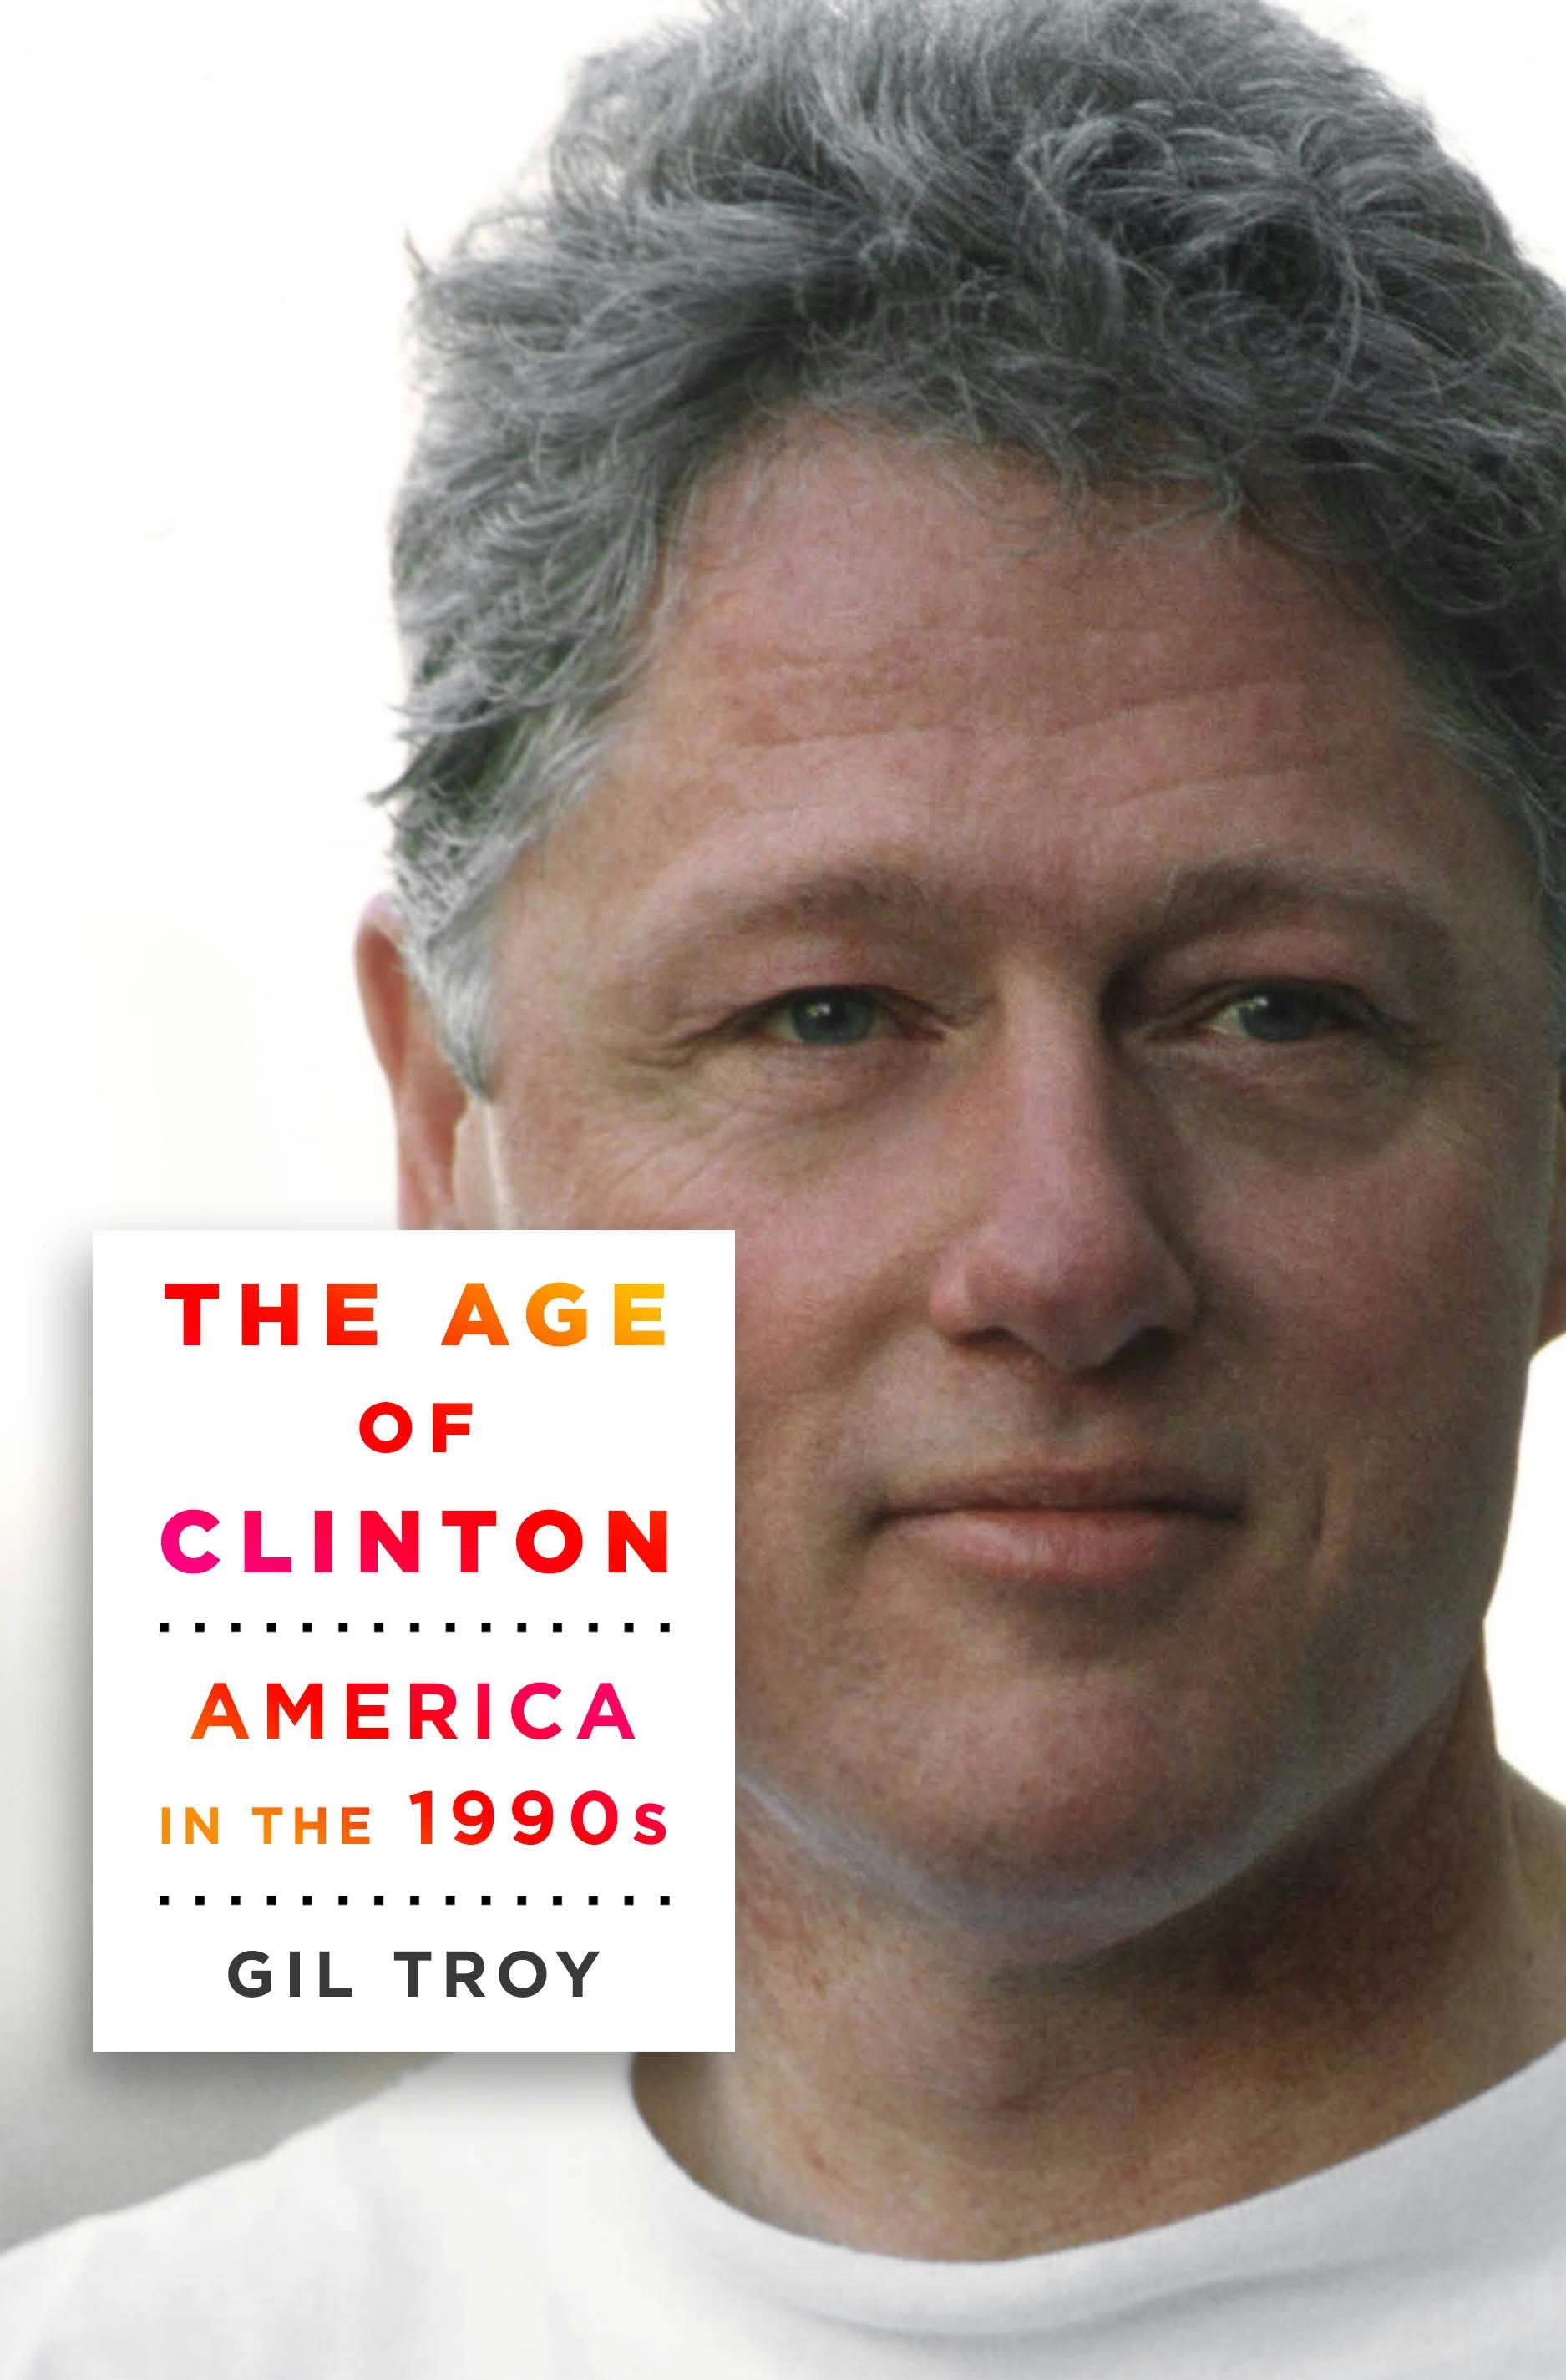 Japan Teen Close Up - The Age of Clinton